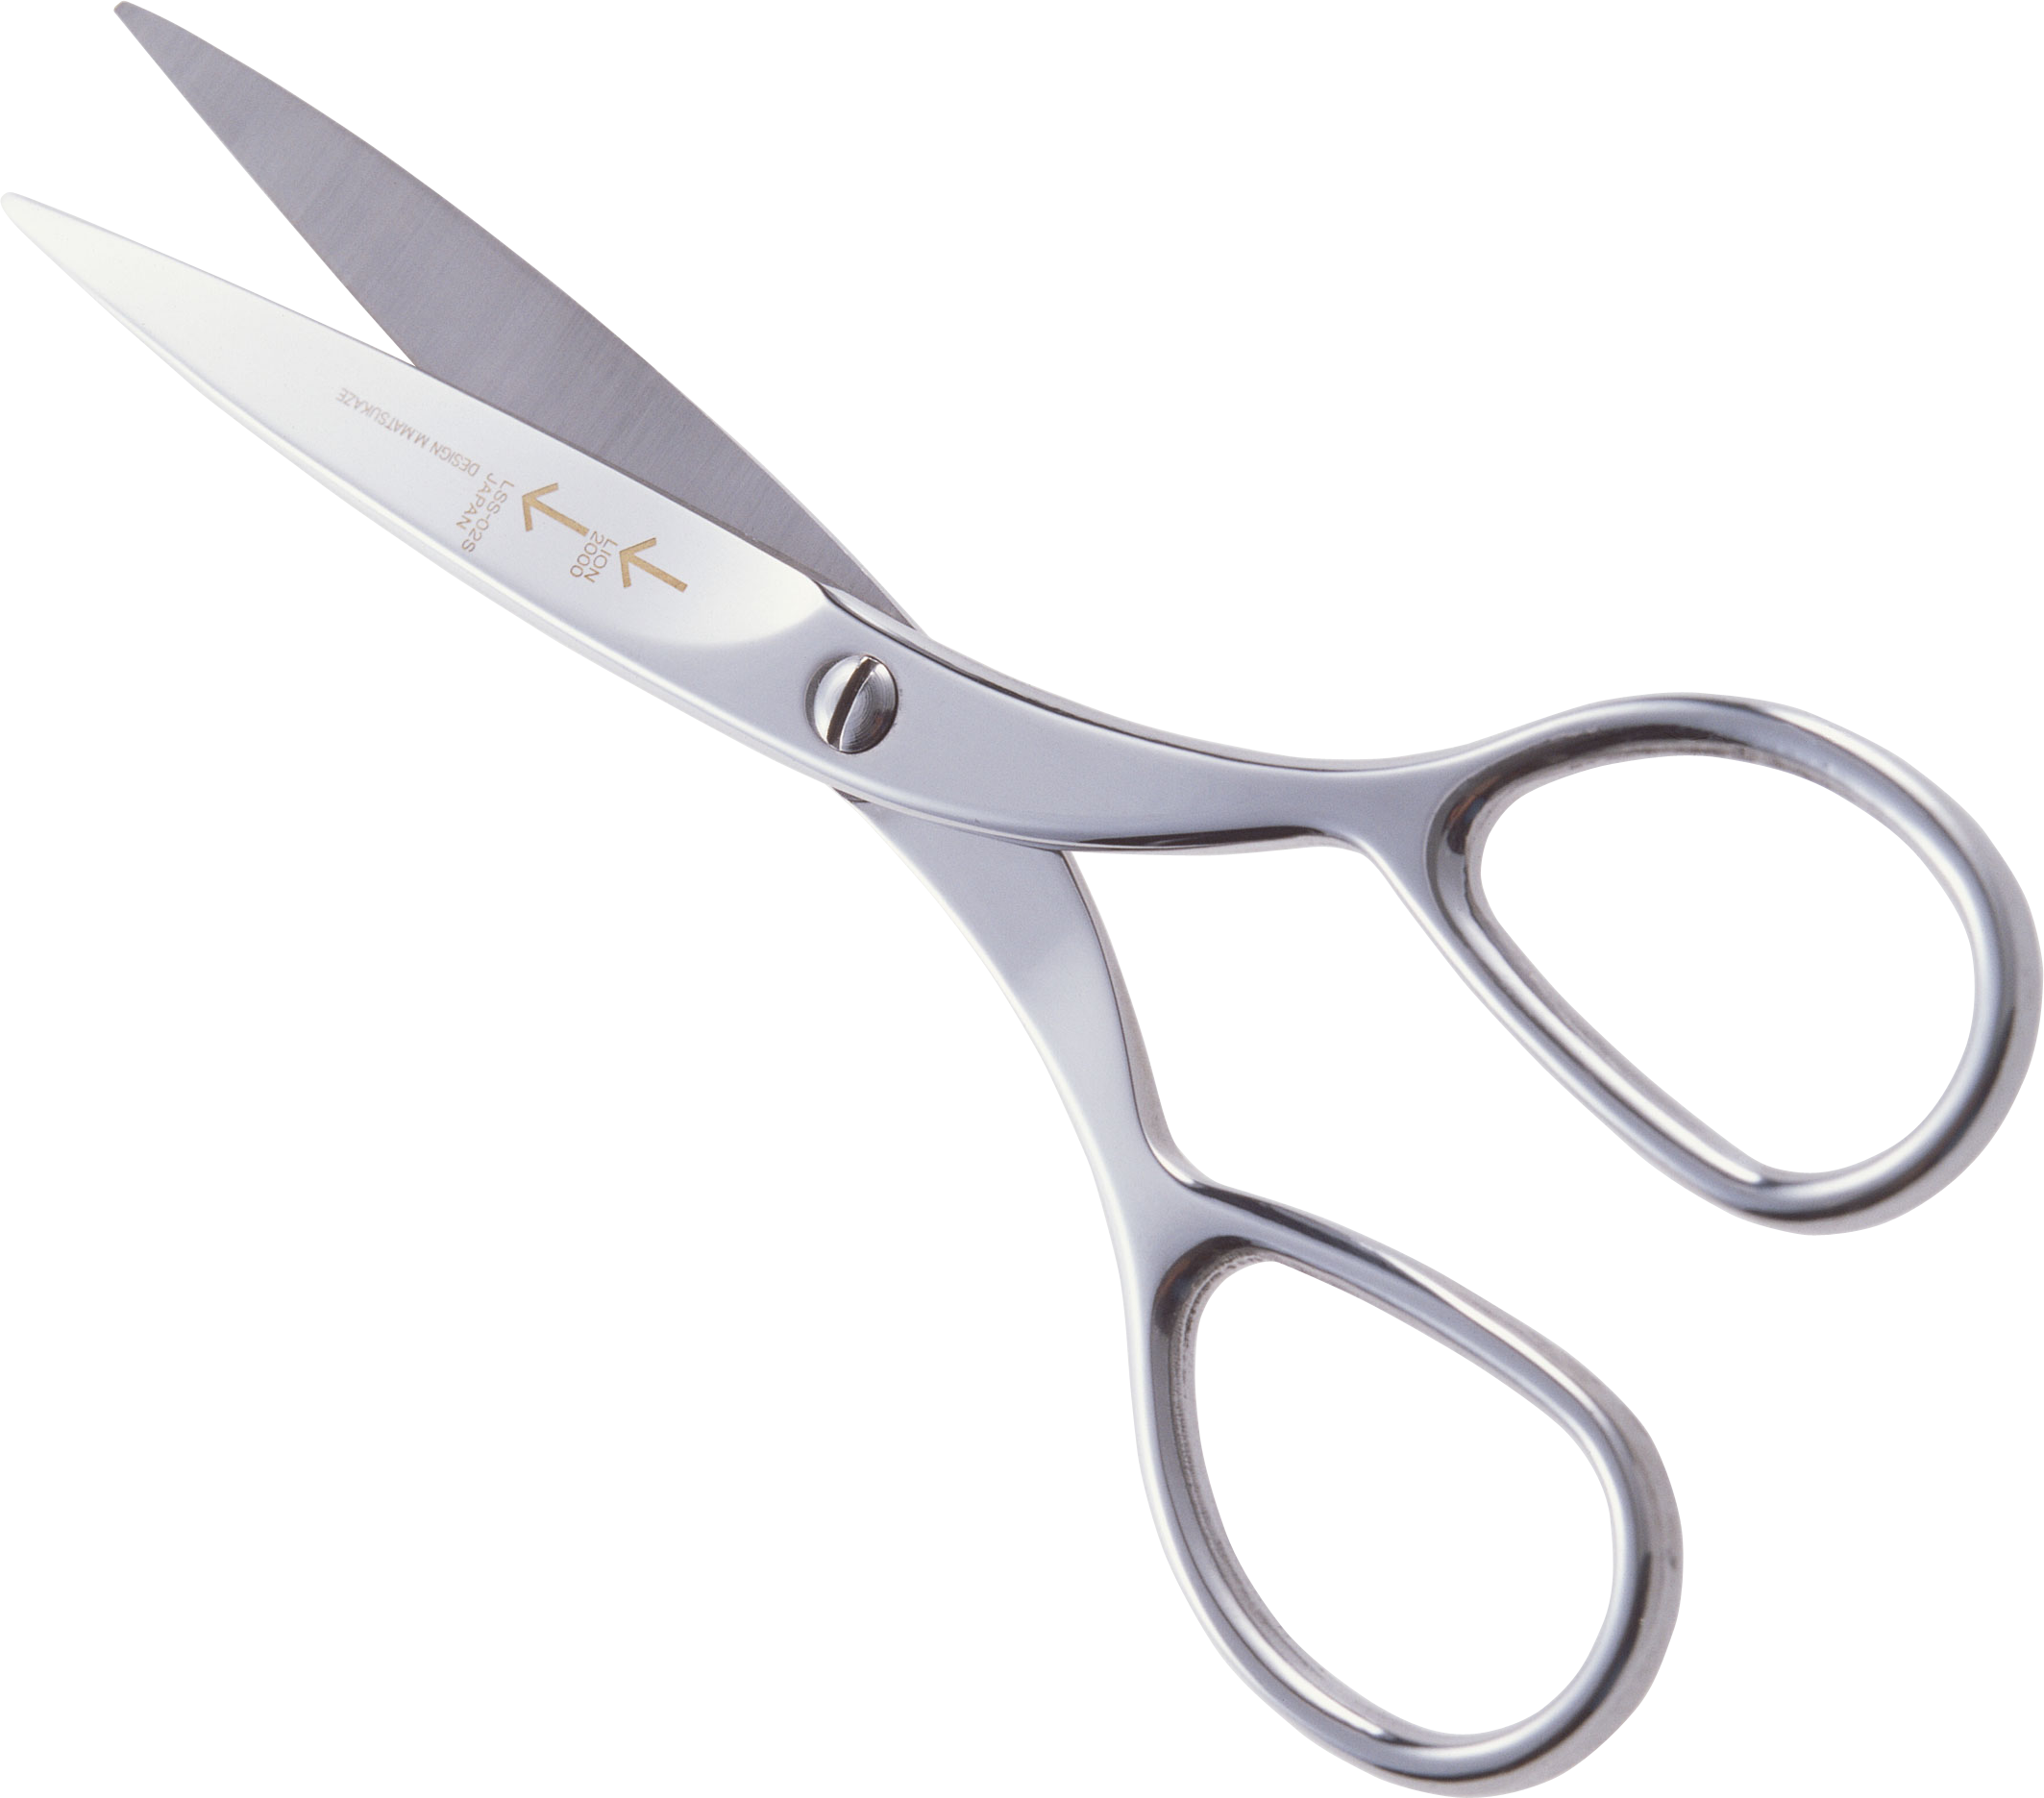 Hair scissors png image. Shears clipart sewing accessory